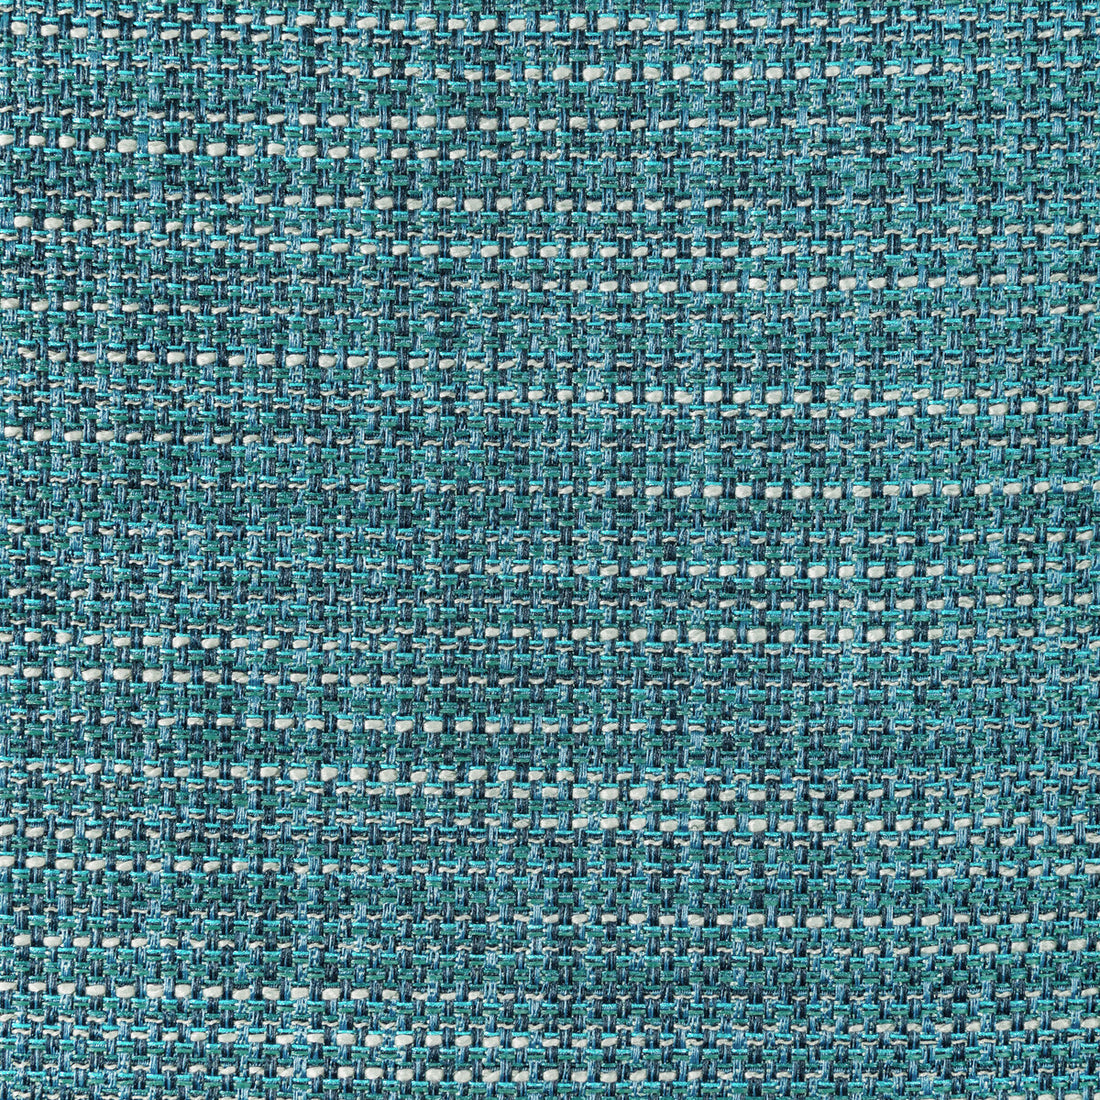 Luma Texture fabric in oasis color - pattern 4947.513.0 - by Kravet Contract in the Fr Window Luma Texture collection